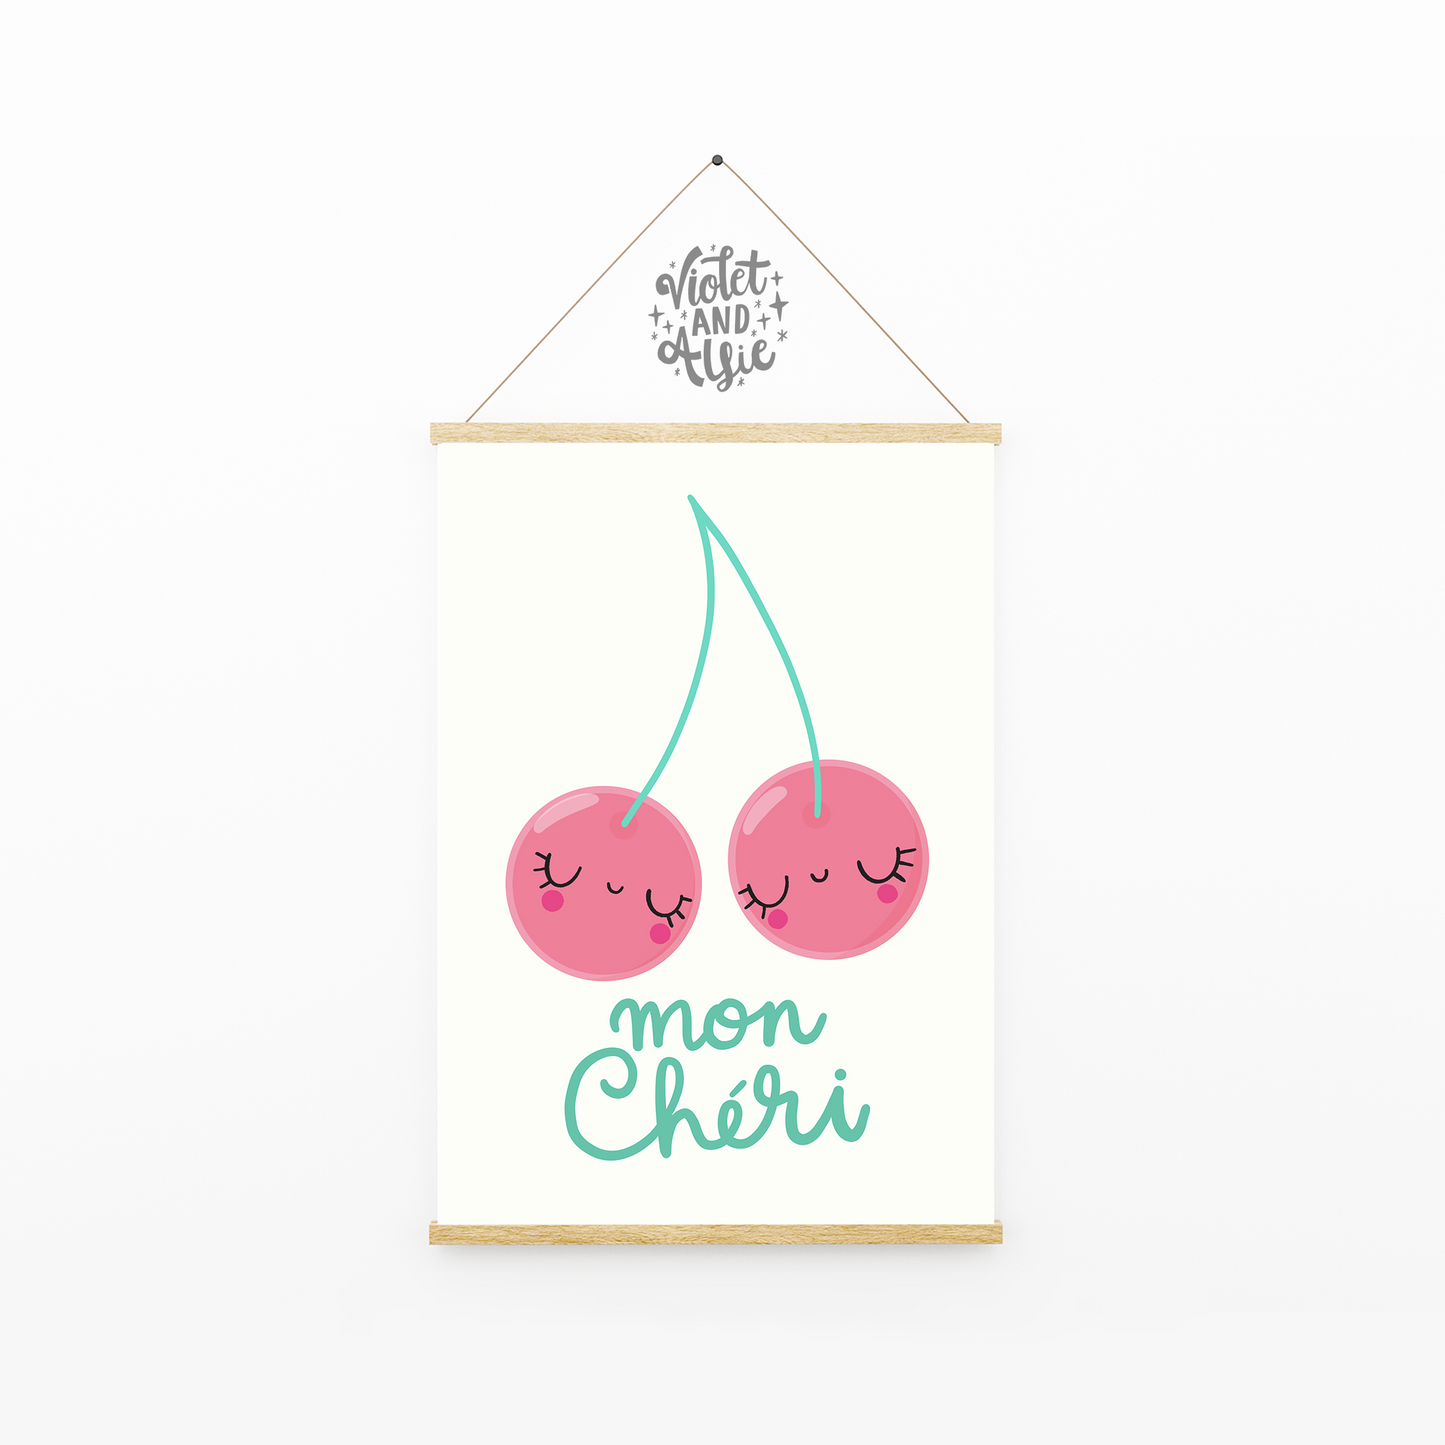 Cute Cherry Print, Nursery or Girl's Bedroom Decor, Mon Cheri Poster, Pink and Mint Wall Art, Prints for gallery wall, Fruity wall art